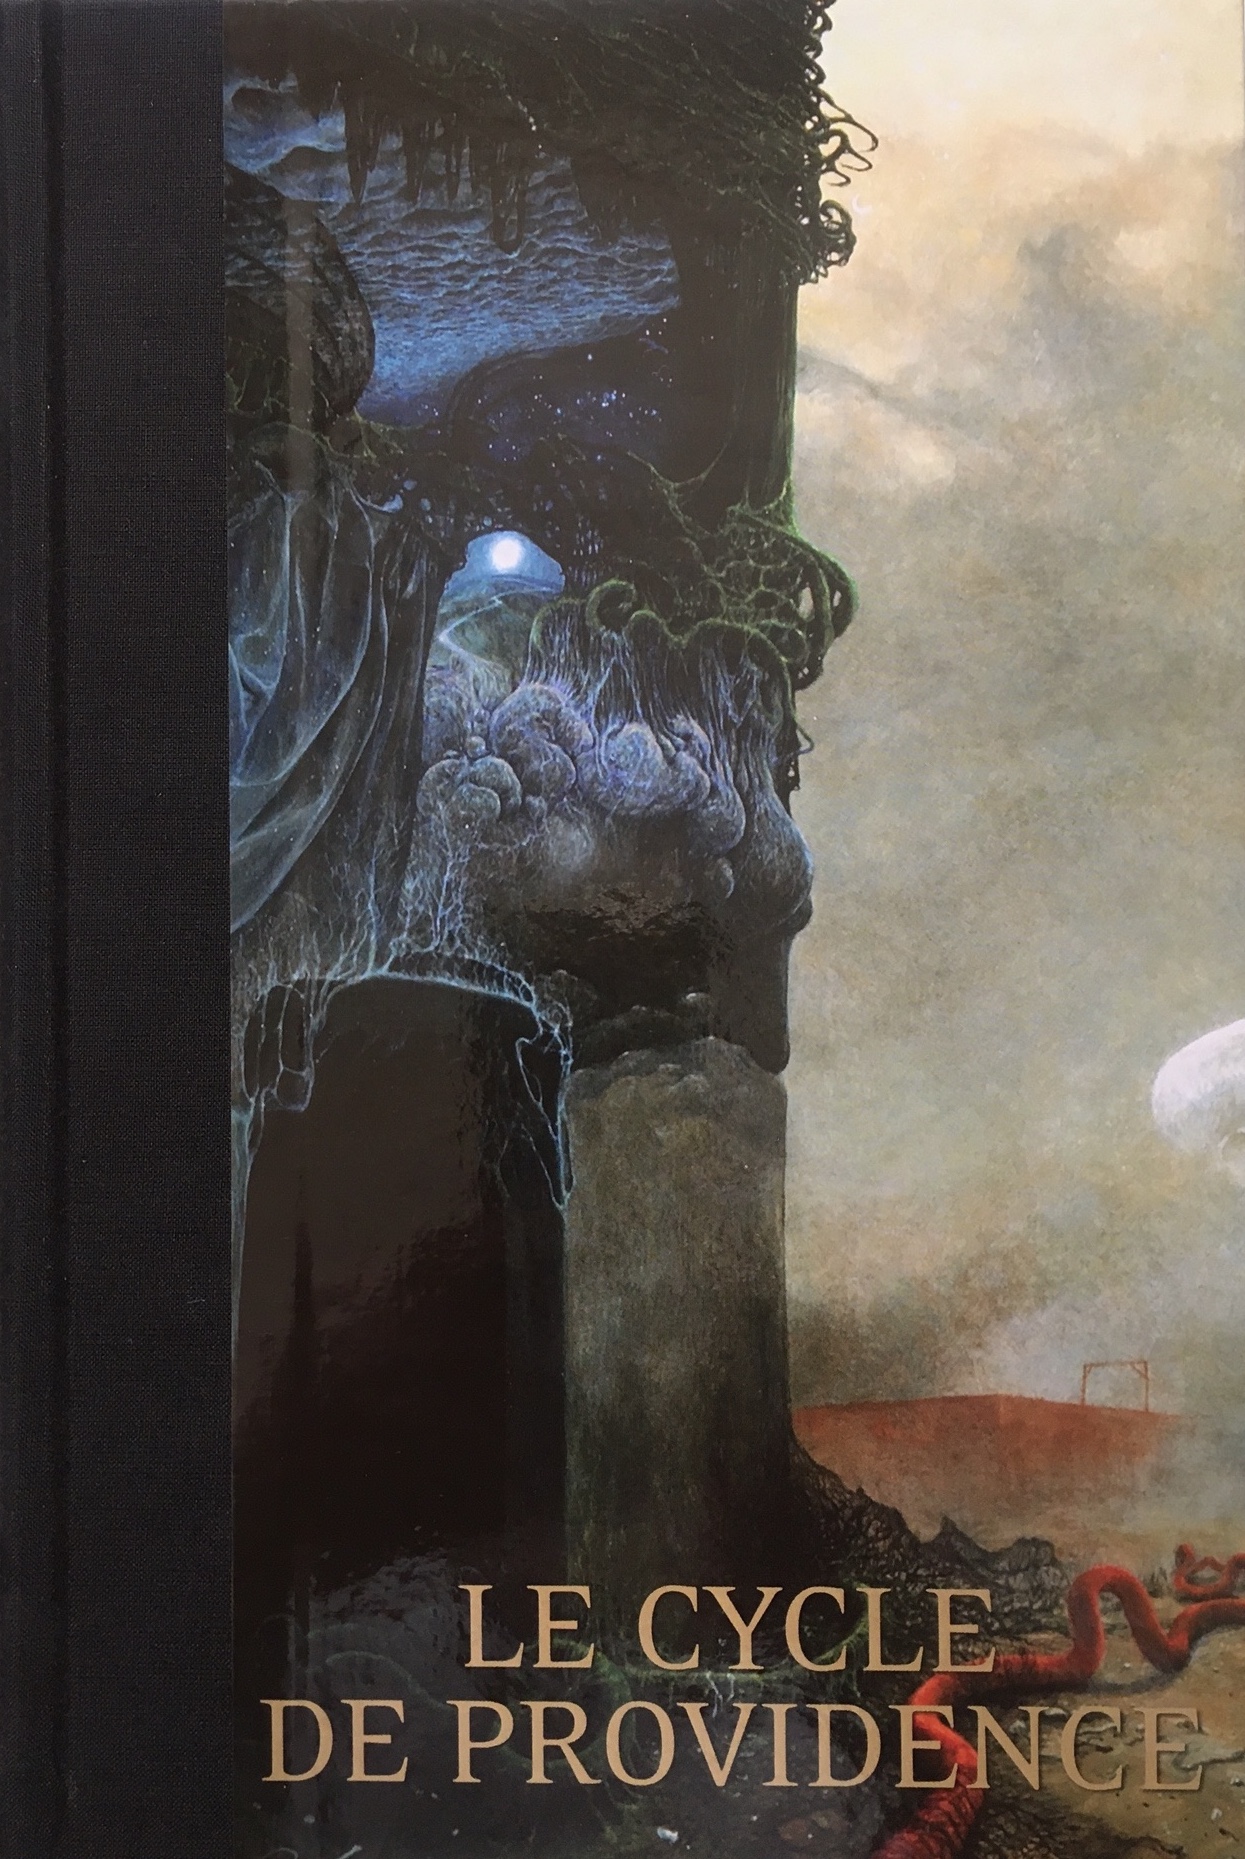 Lovecraft tome 4 Le Cycle de Providence, version luxe